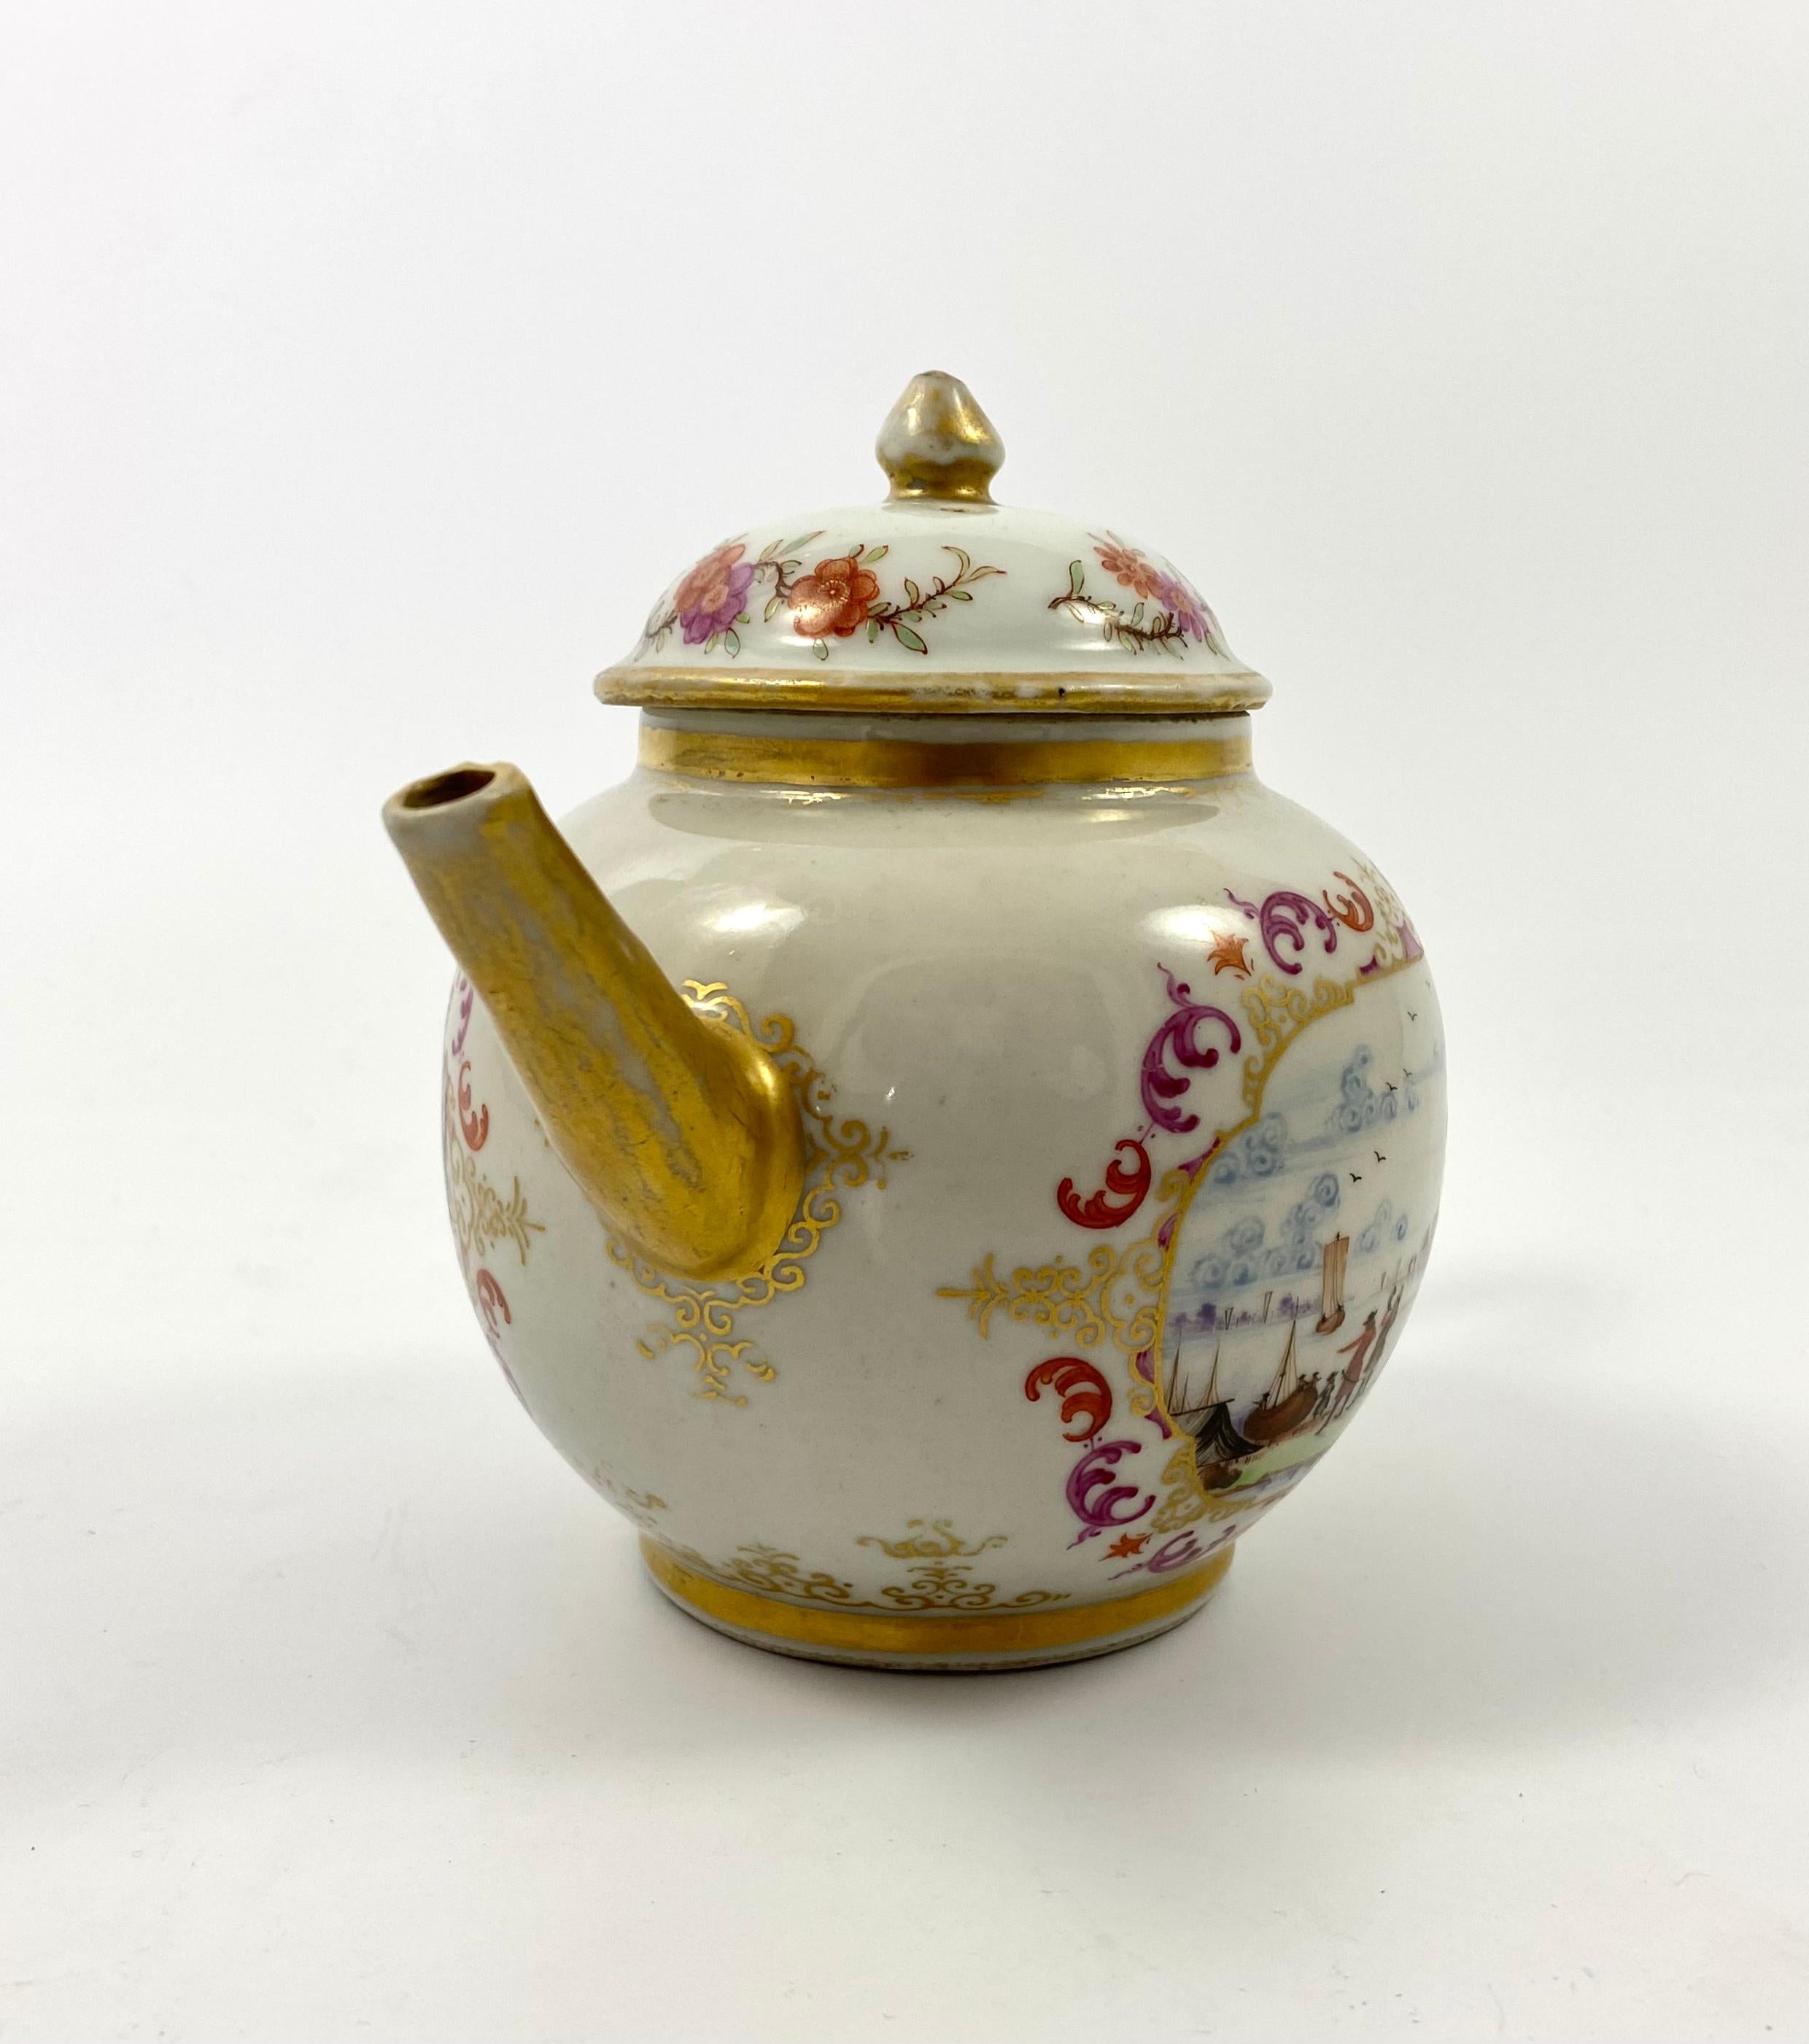 Rare Chinese ‘Export’ porcelain teapot and cover, c. 1760, Qianlong Period. Hand painted in the Meissen style, with panels of merchants in conversation, before harbour scenes. The panels edged in gilt-scrolled quatrelobed cartouche, beneath puce